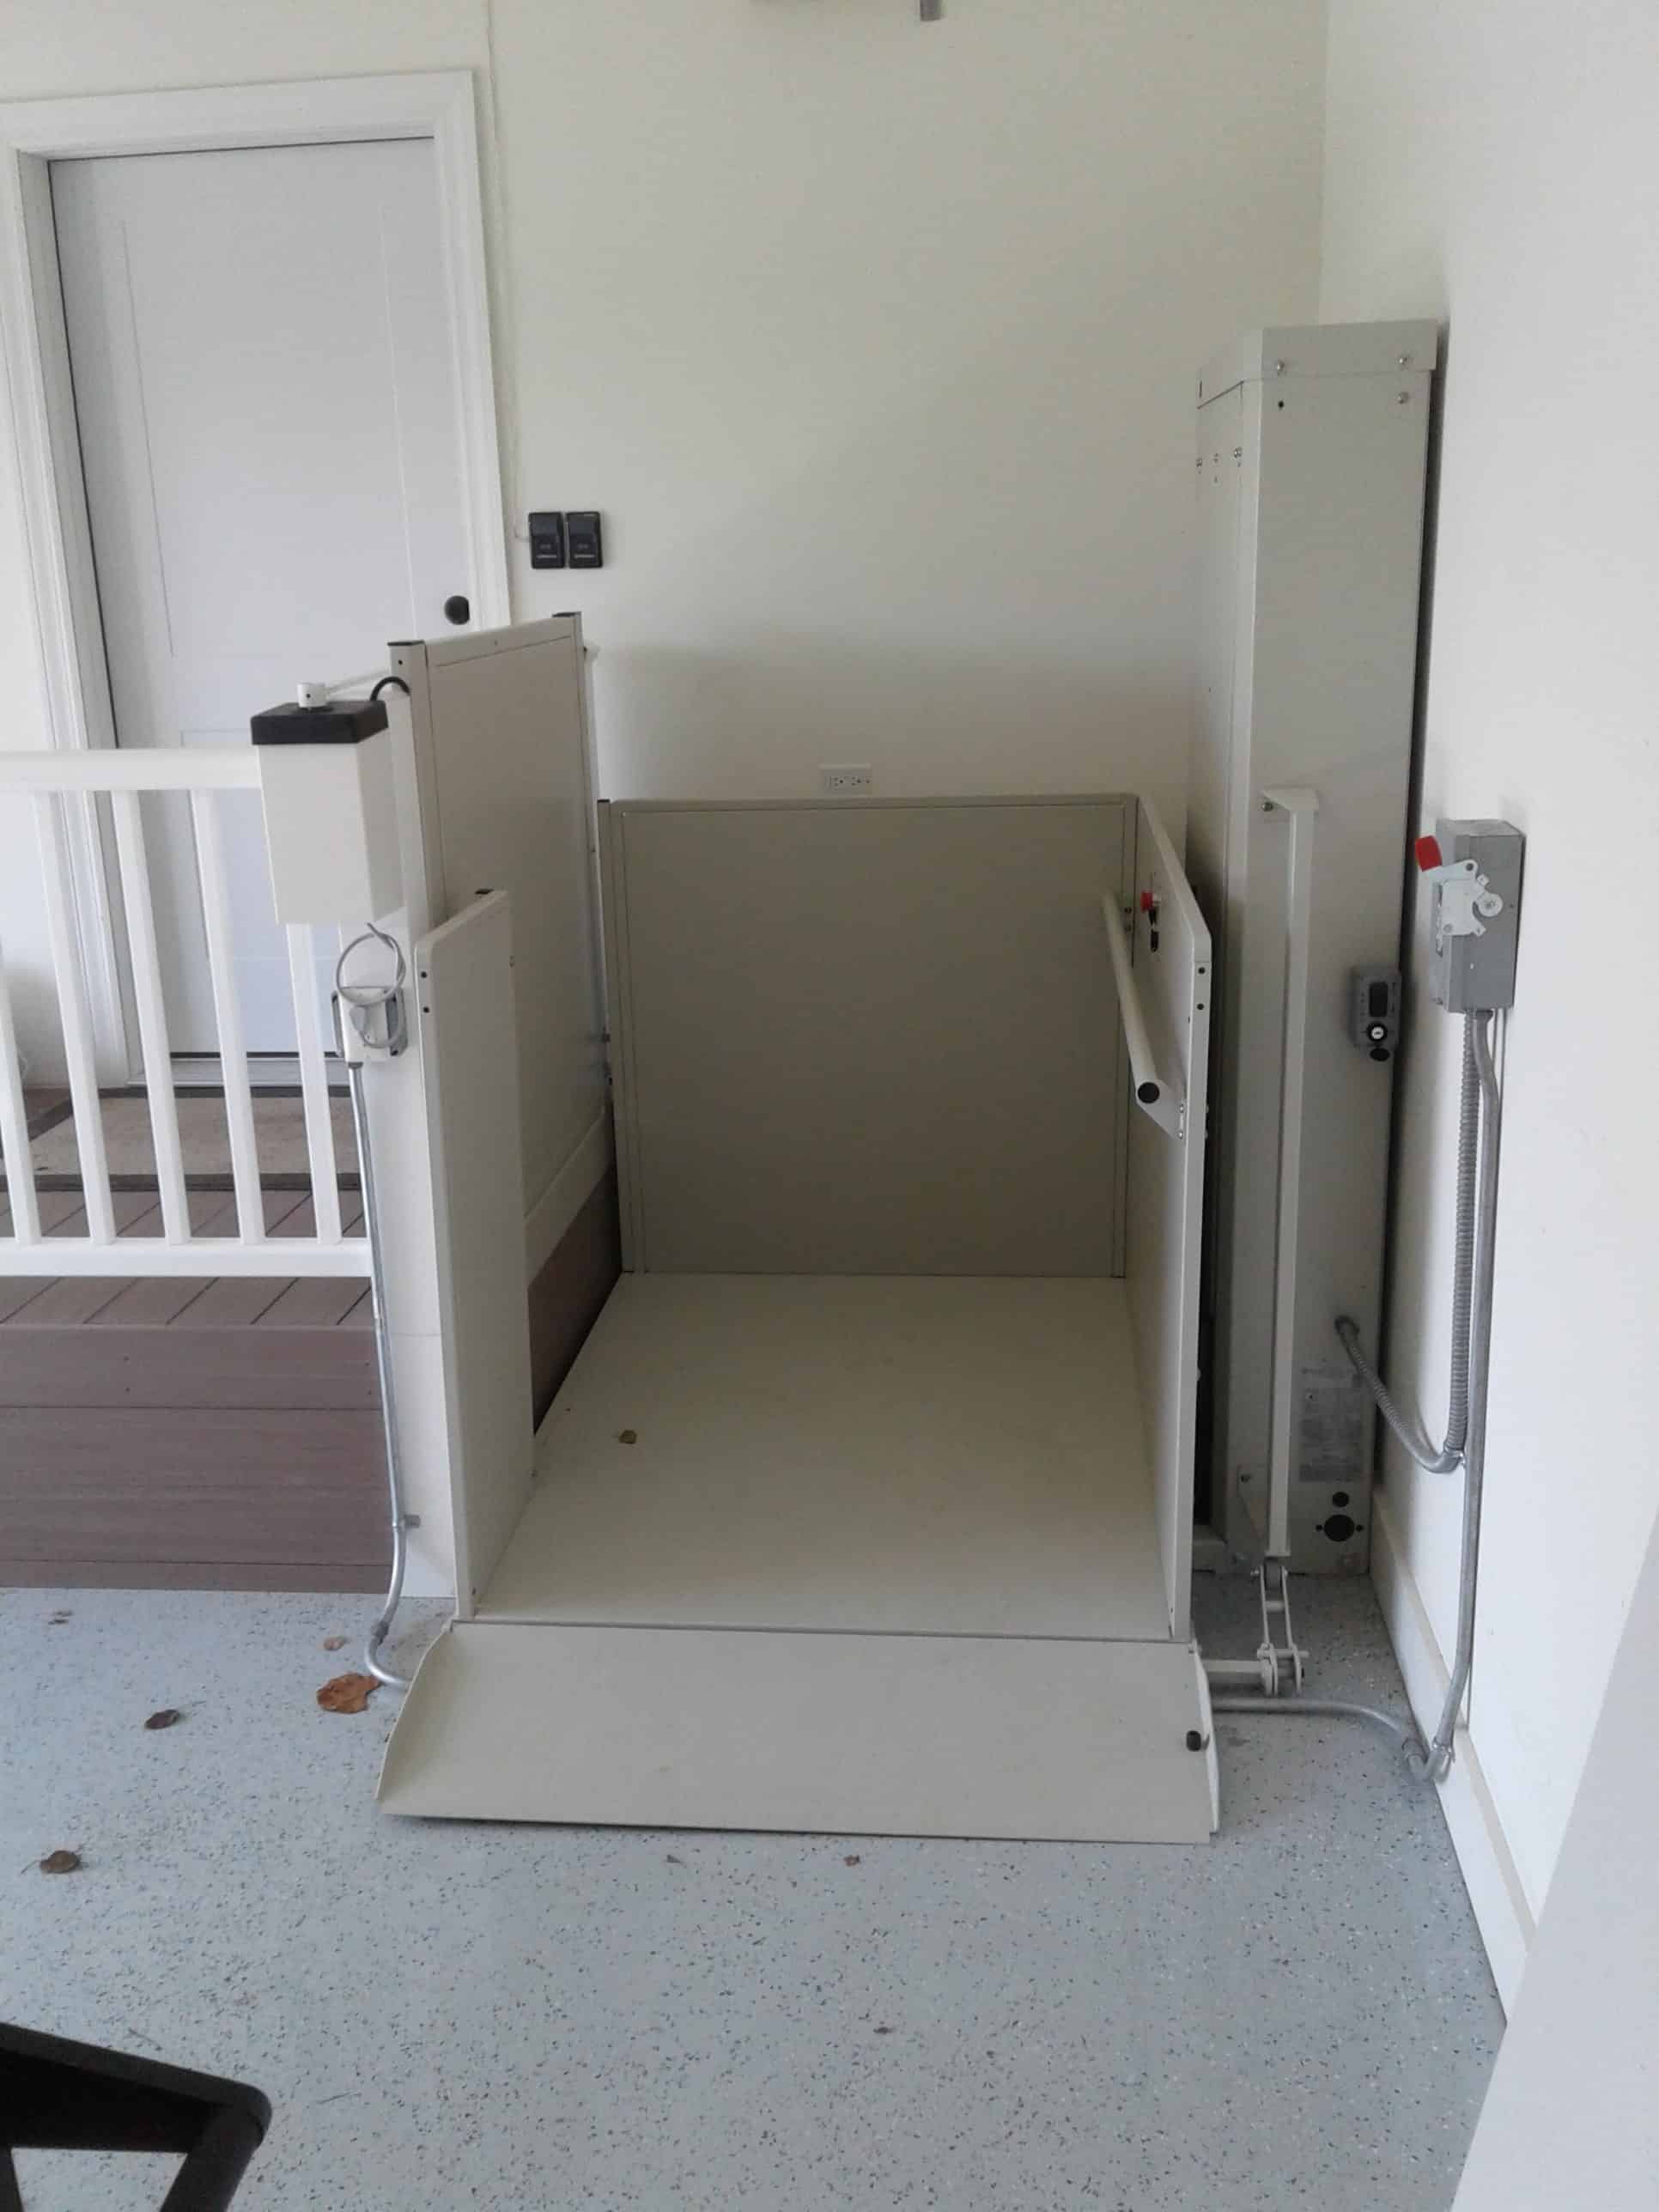 wheelchair lift installed in garage of home in Chicago suburb